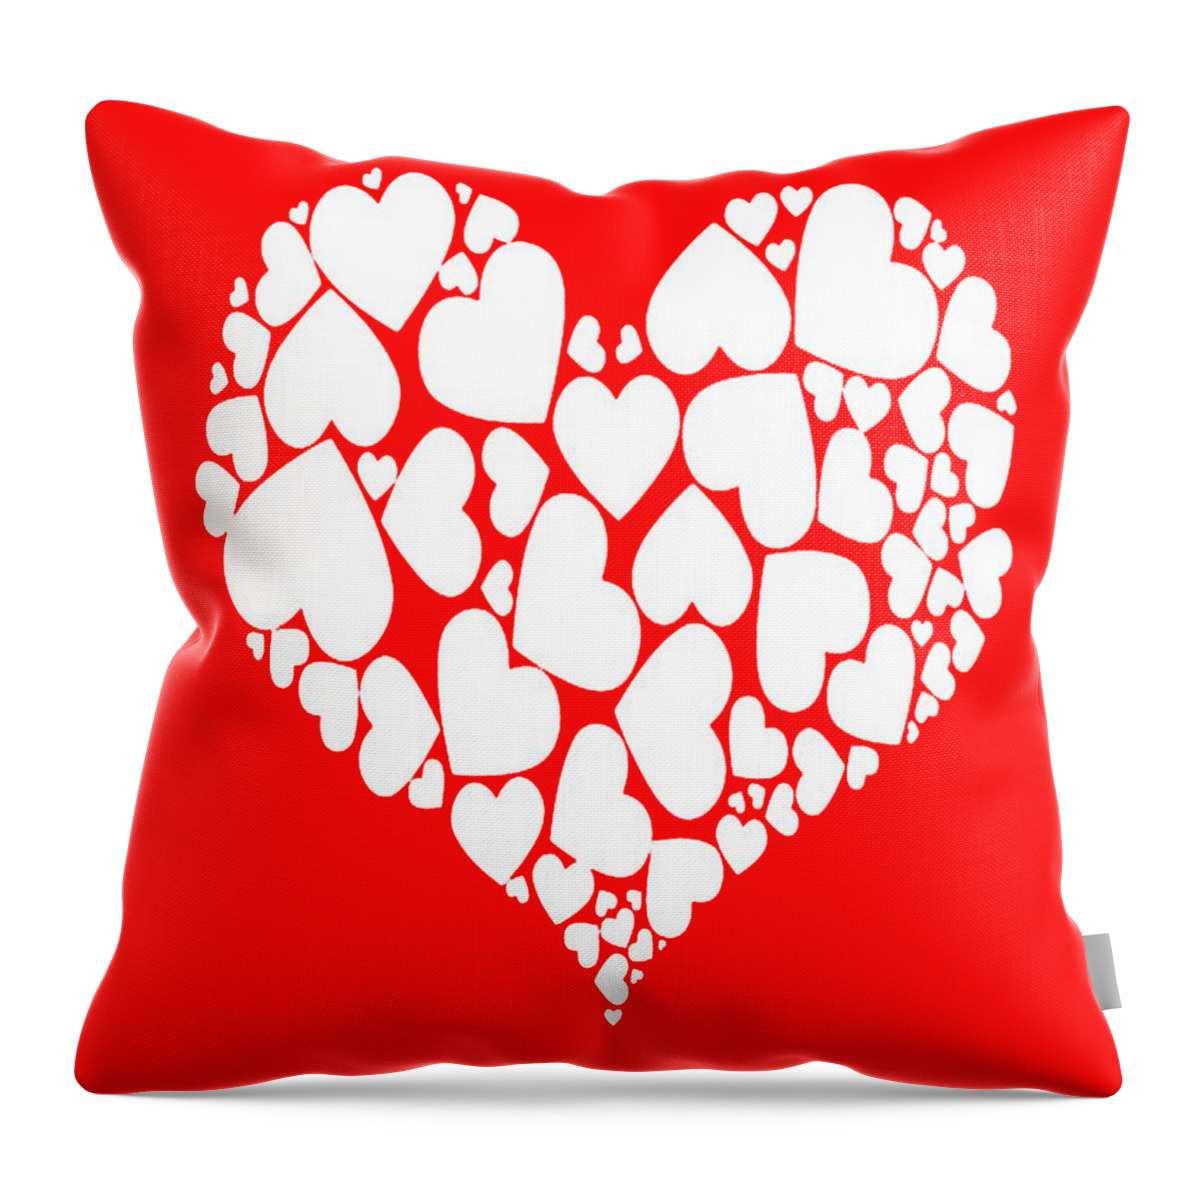 Love Throw Pillow featuring the digital art A Heart Full of Love Romantic Pattern by Taiche Acrylic Art